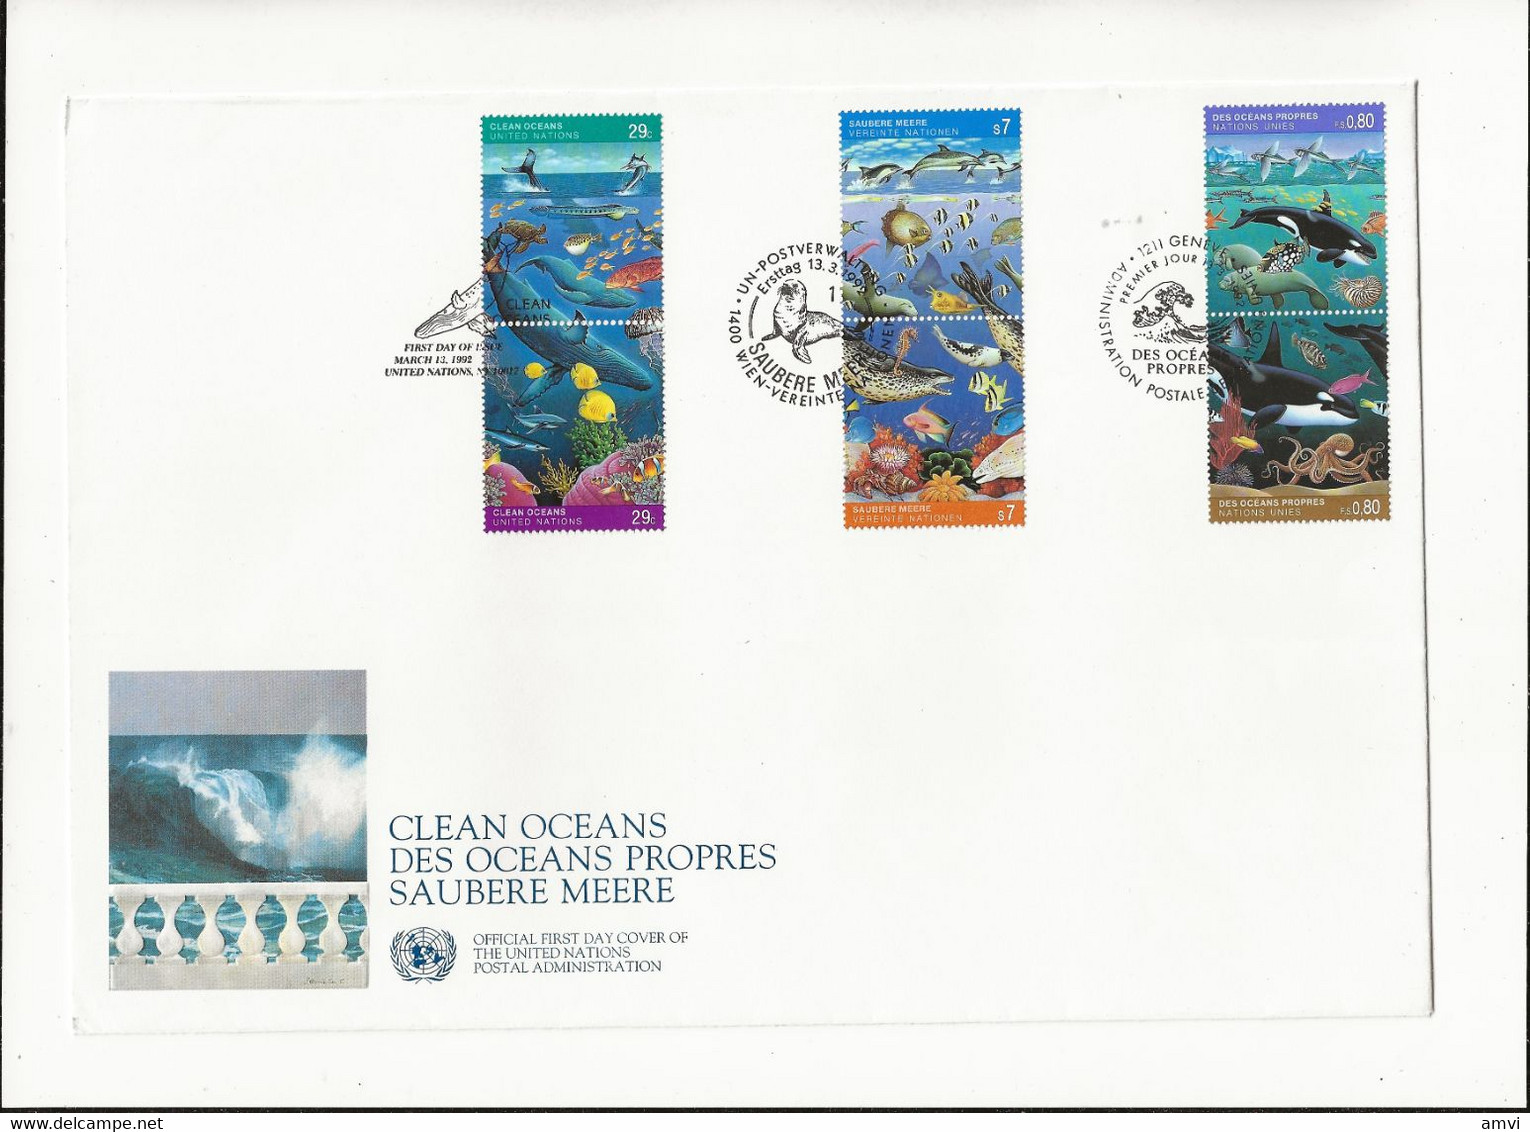 22-4 - 878 WHALES DOLPHIN FISH Multi Stamps FDC UN Vienna United Nations Environment Clean Oceans - Ballenas